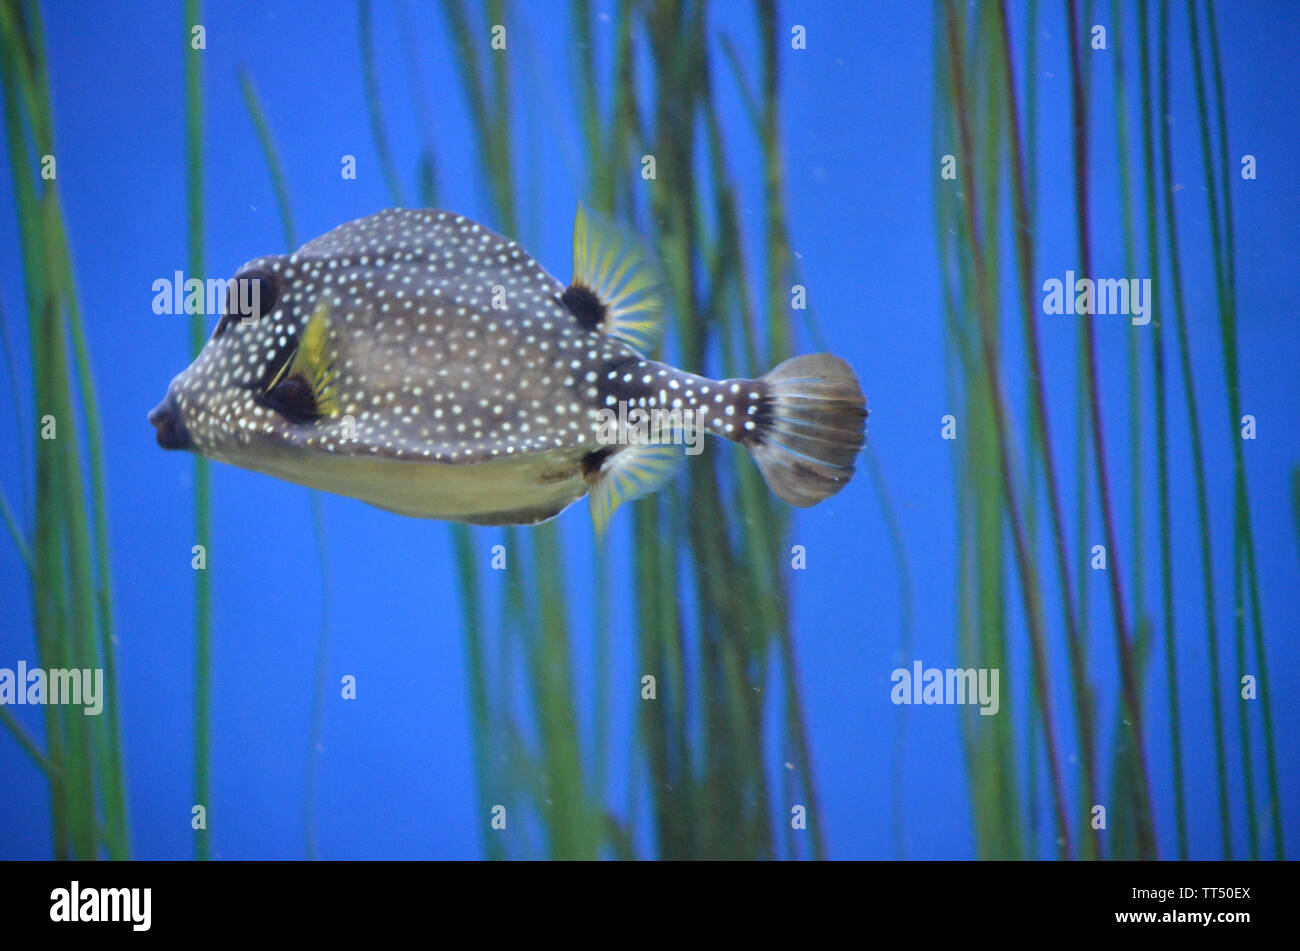 Striking picture of spotted Trunkfish swimming with deep blue background Stock Photo